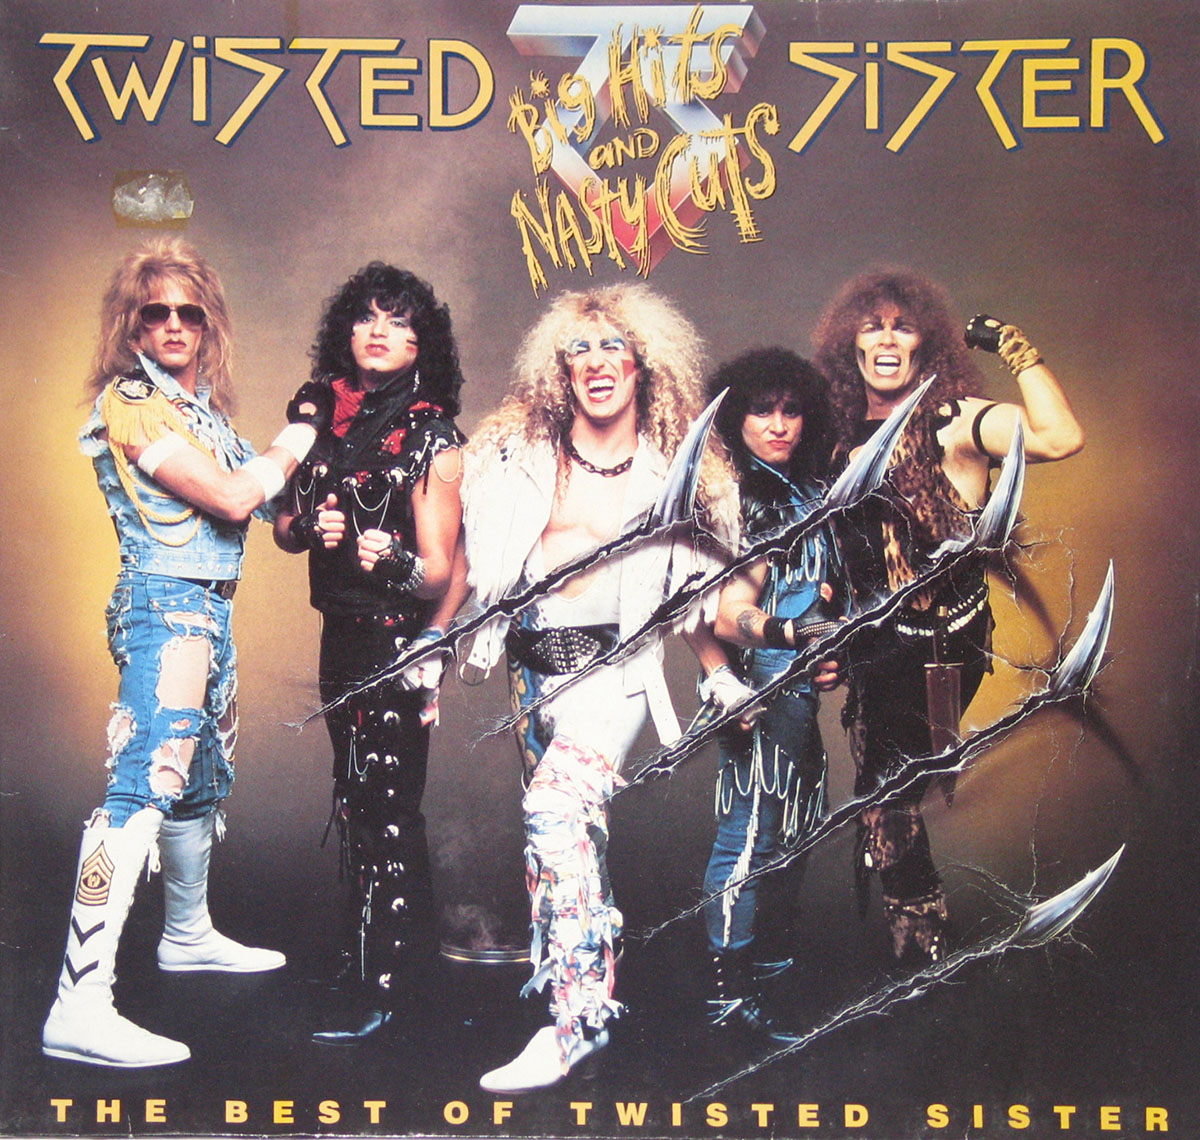 TWISTED SISTER - Artist and Band Information Collectors 